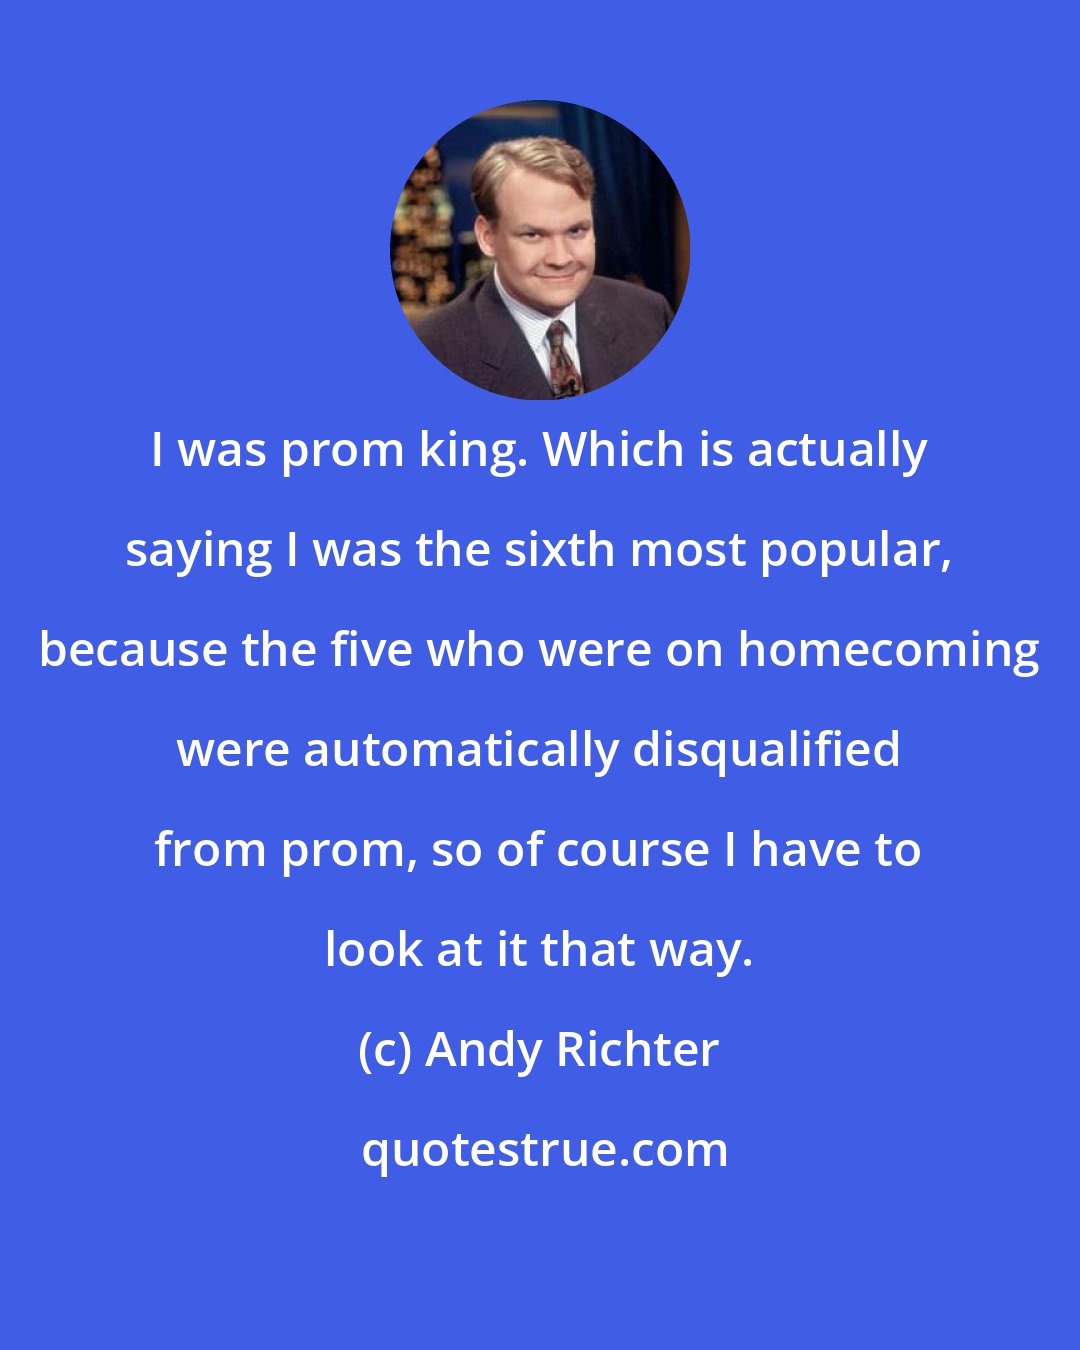 Andy Richter: I was prom king. Which is actually saying I was the sixth most popular, because the five who were on homecoming were automatically disqualified from prom, so of course I have to look at it that way.